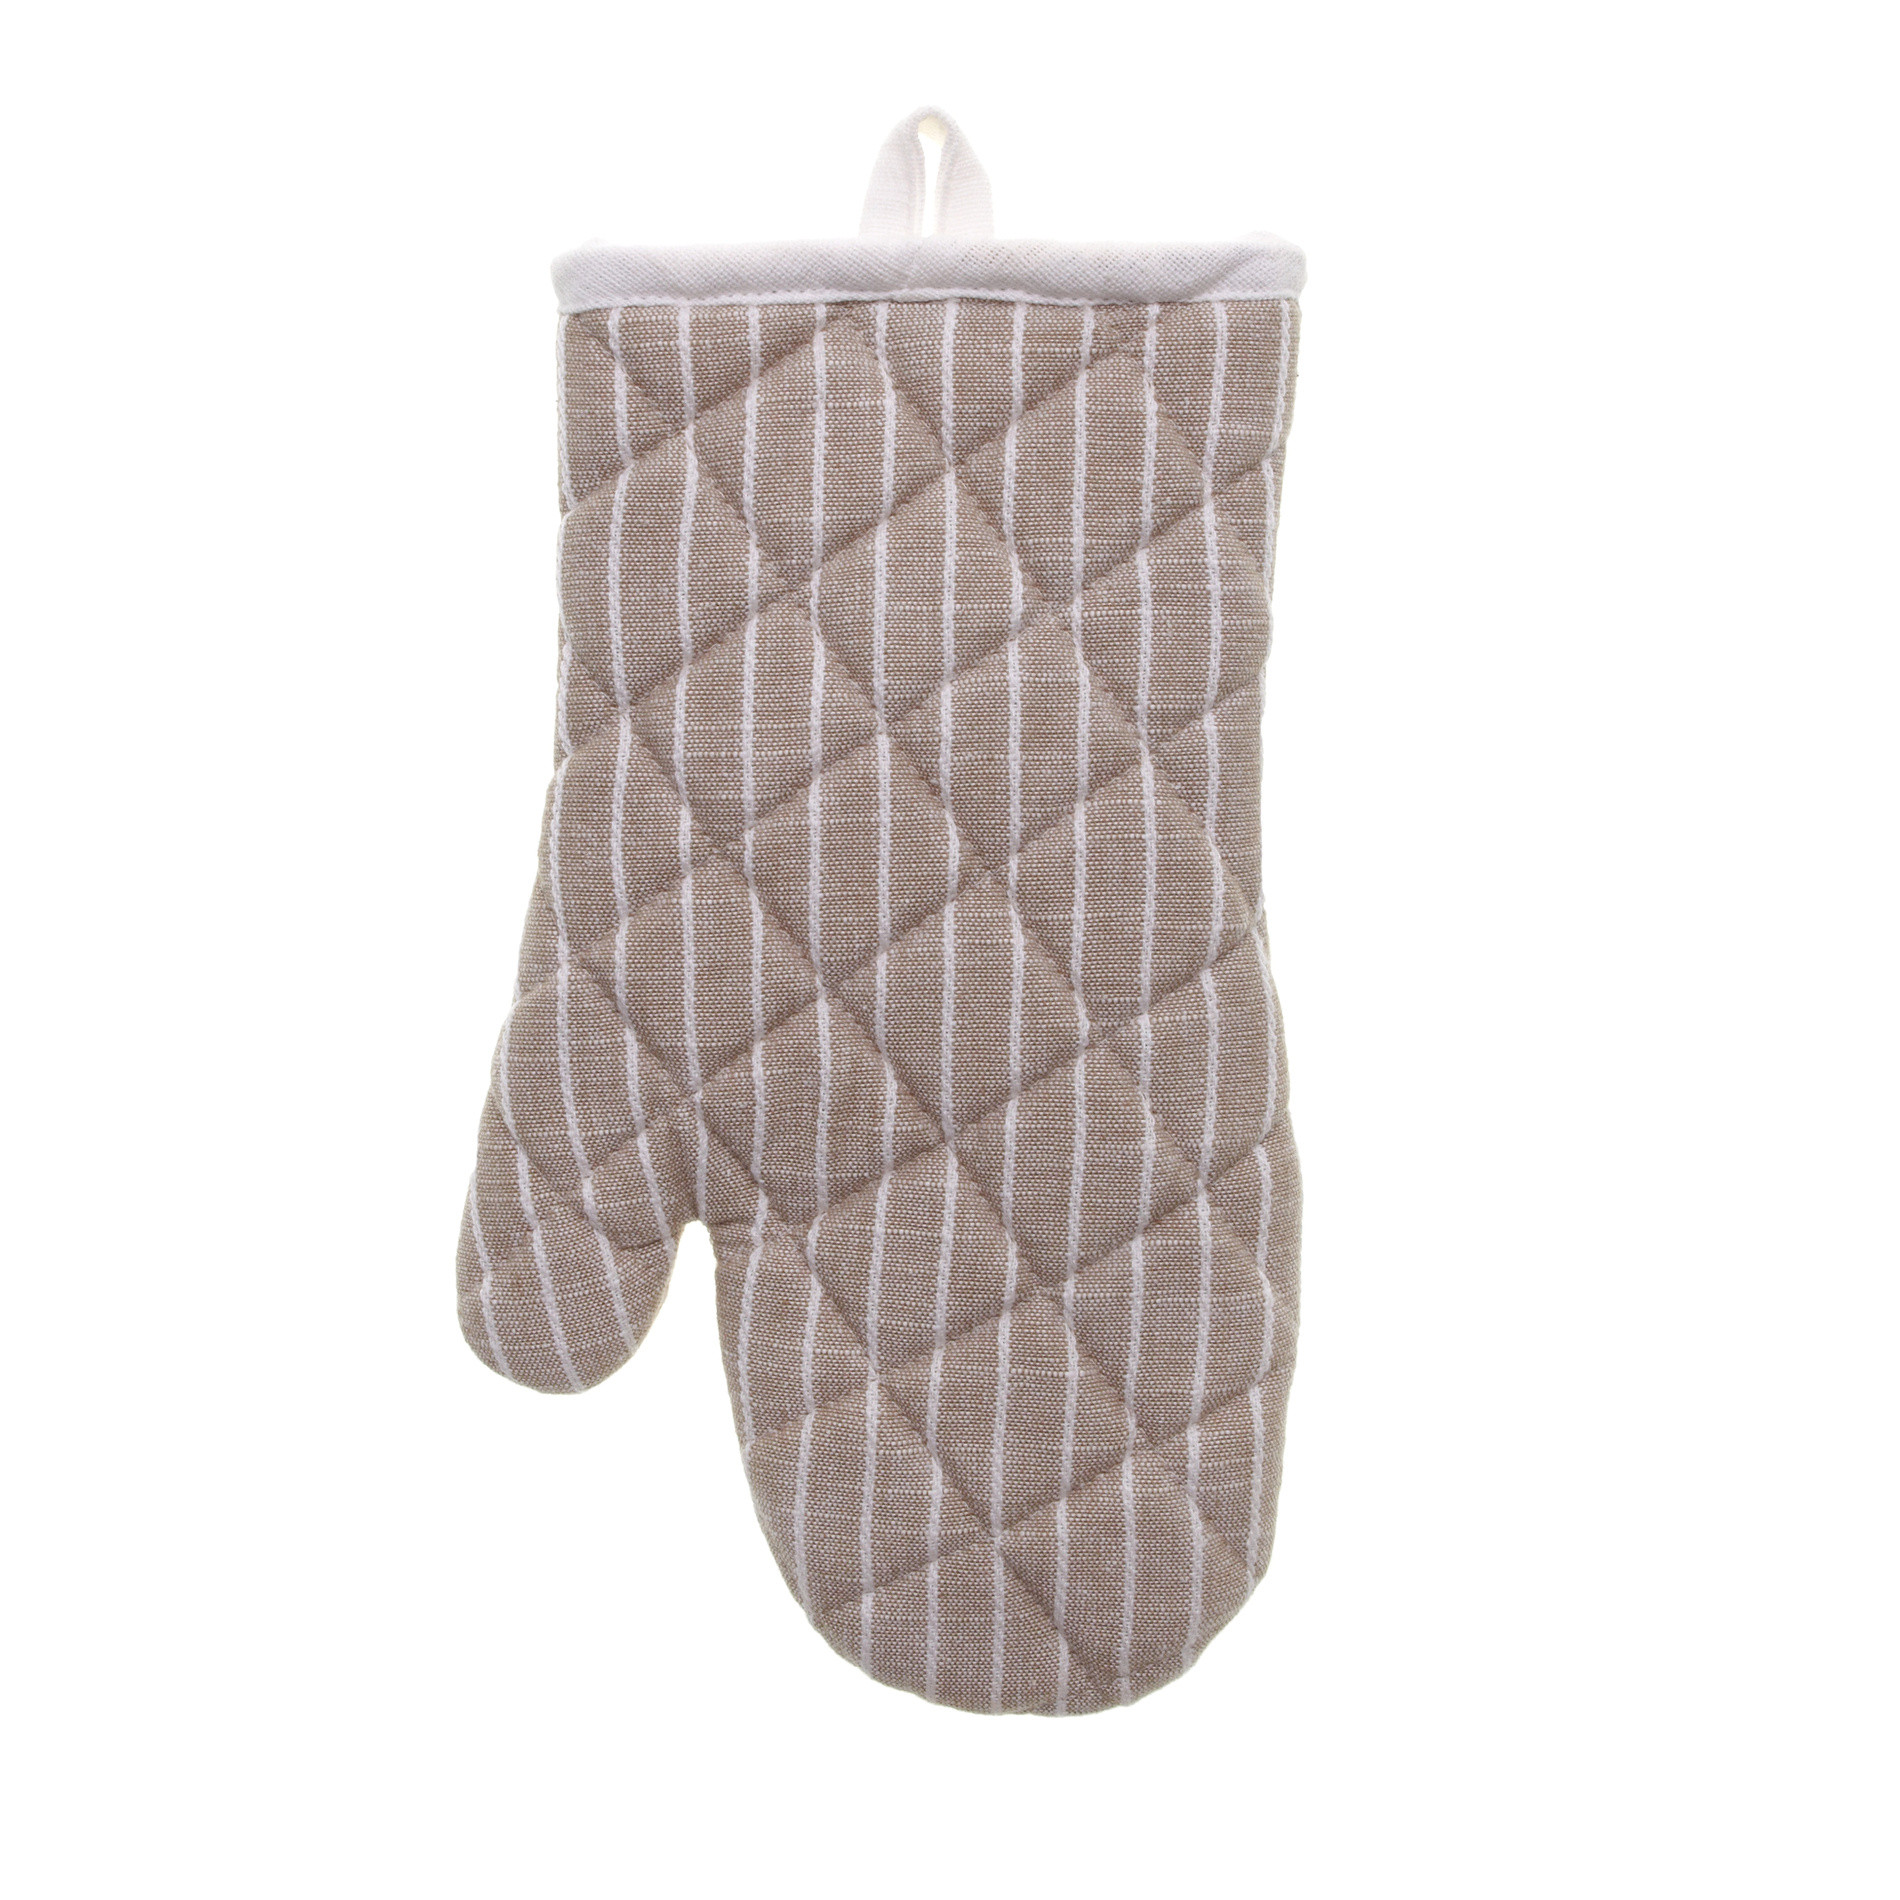 Striped oven mitt, White / Grey, large image number 0